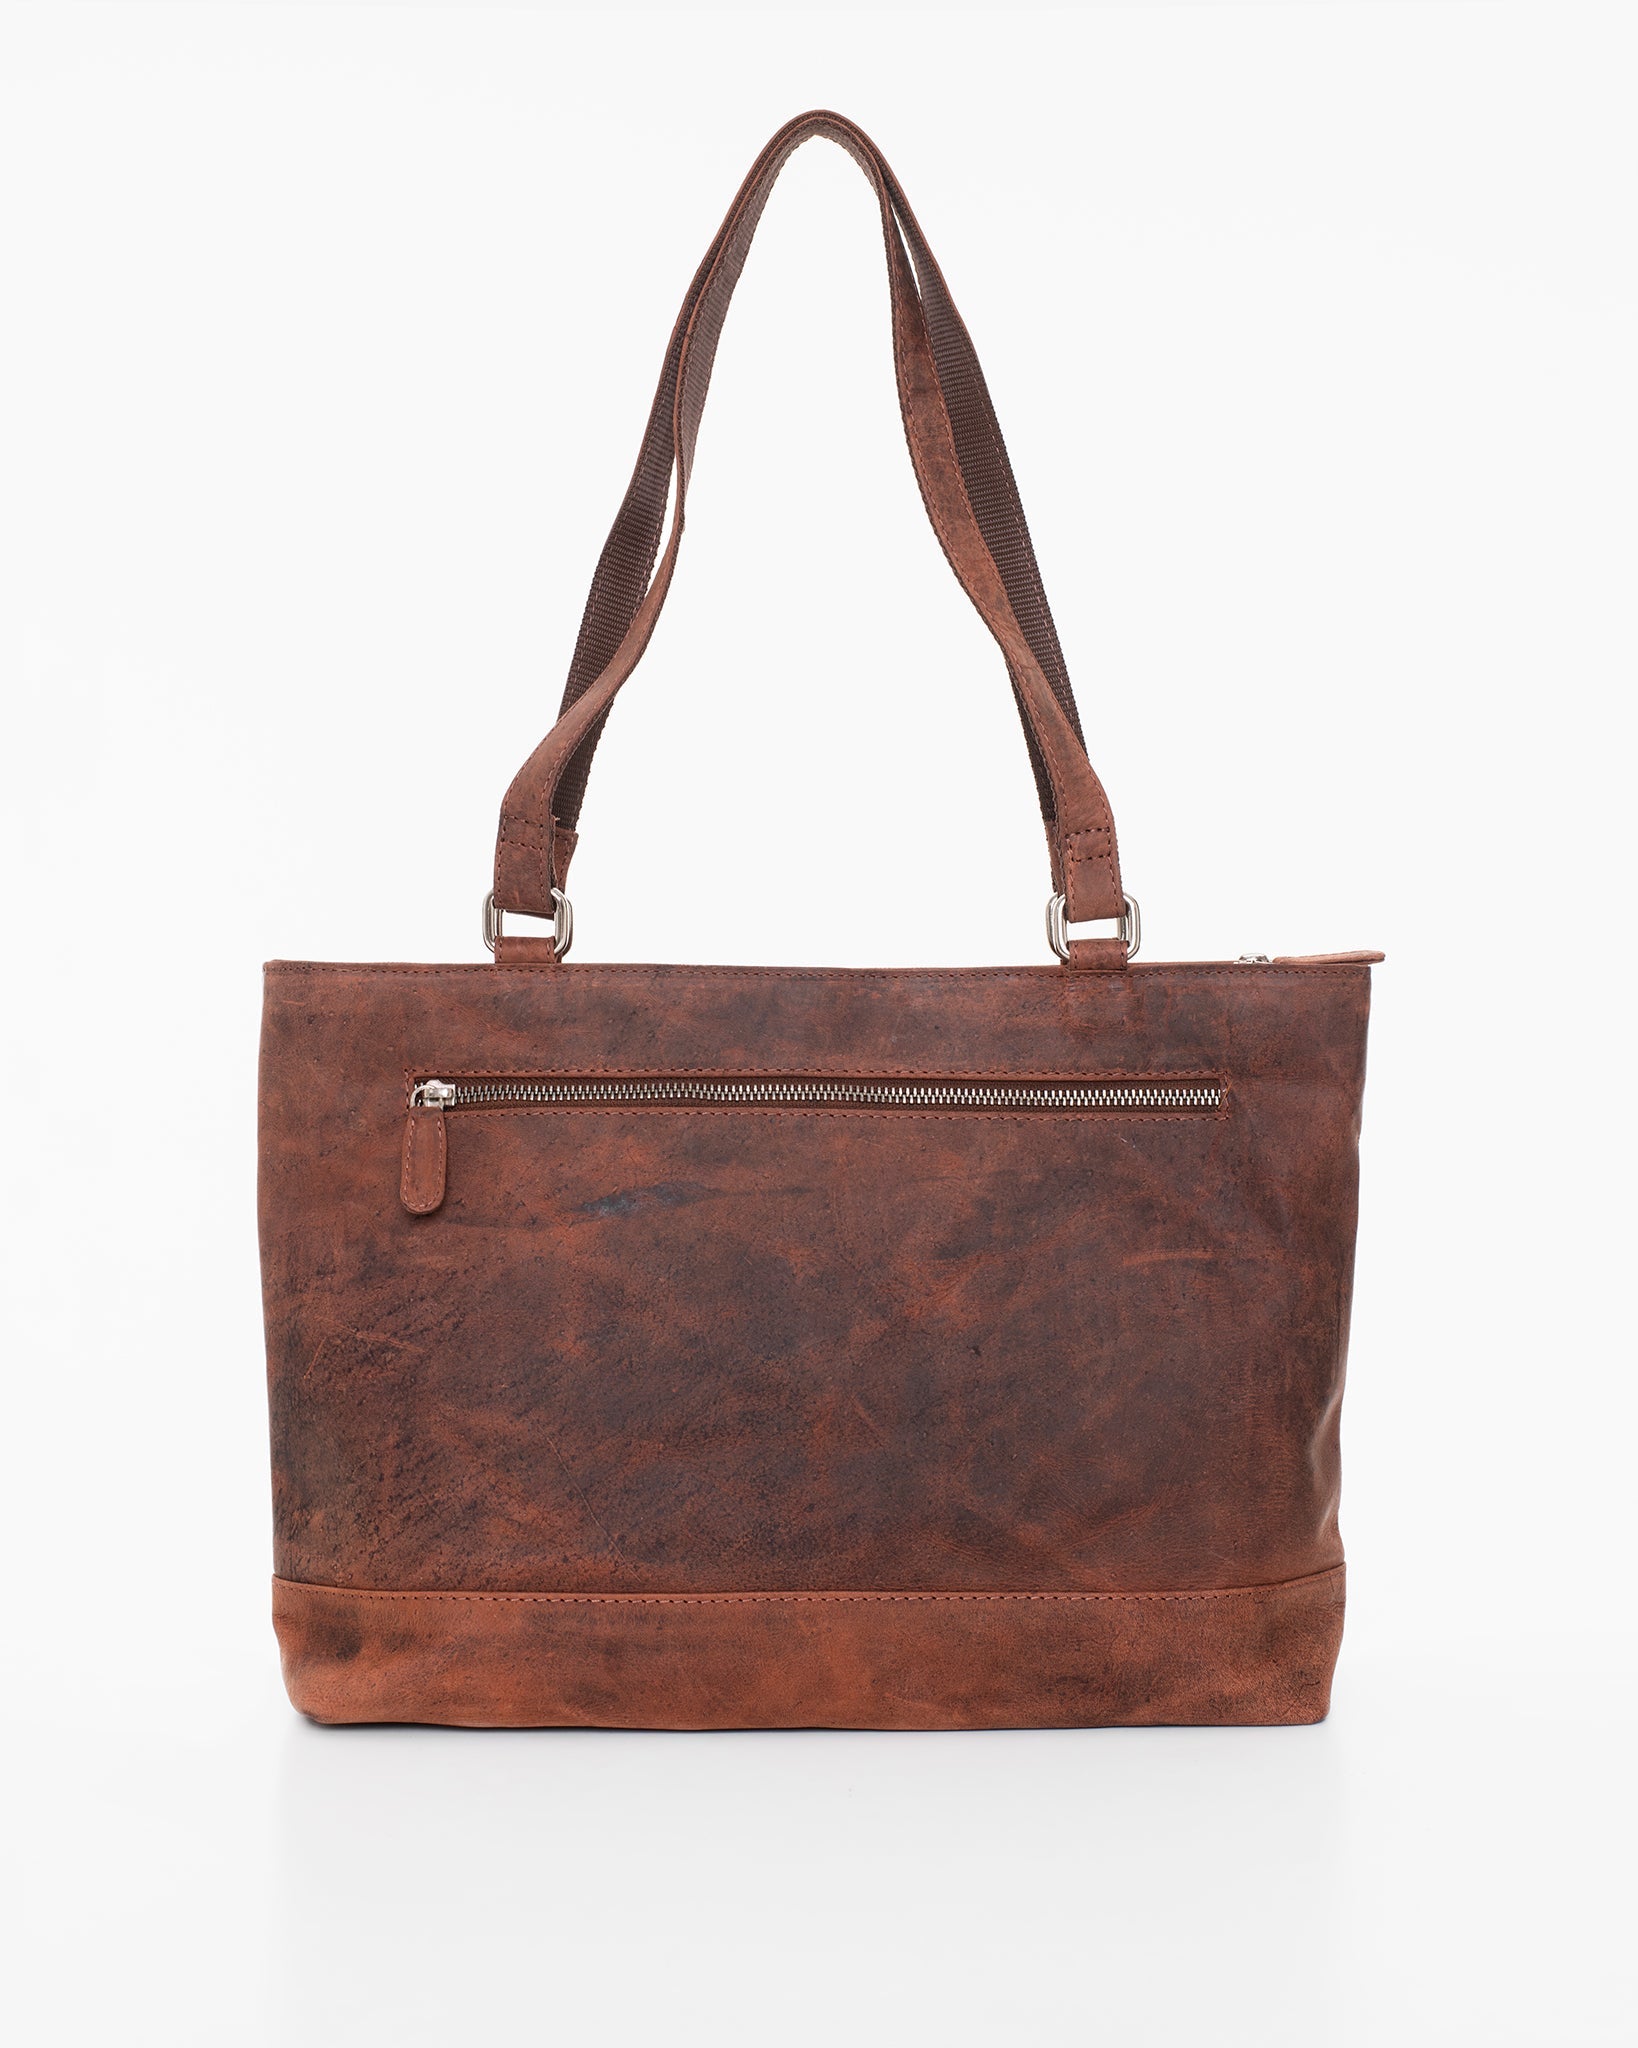 Brown leather shoulder bag with multiple zippered compartments, including one inside and two outside. Finnish-designed NK1909 by Nabo, crafted from genuine leather. Dimensions: 40 x 26 x 11 cm.